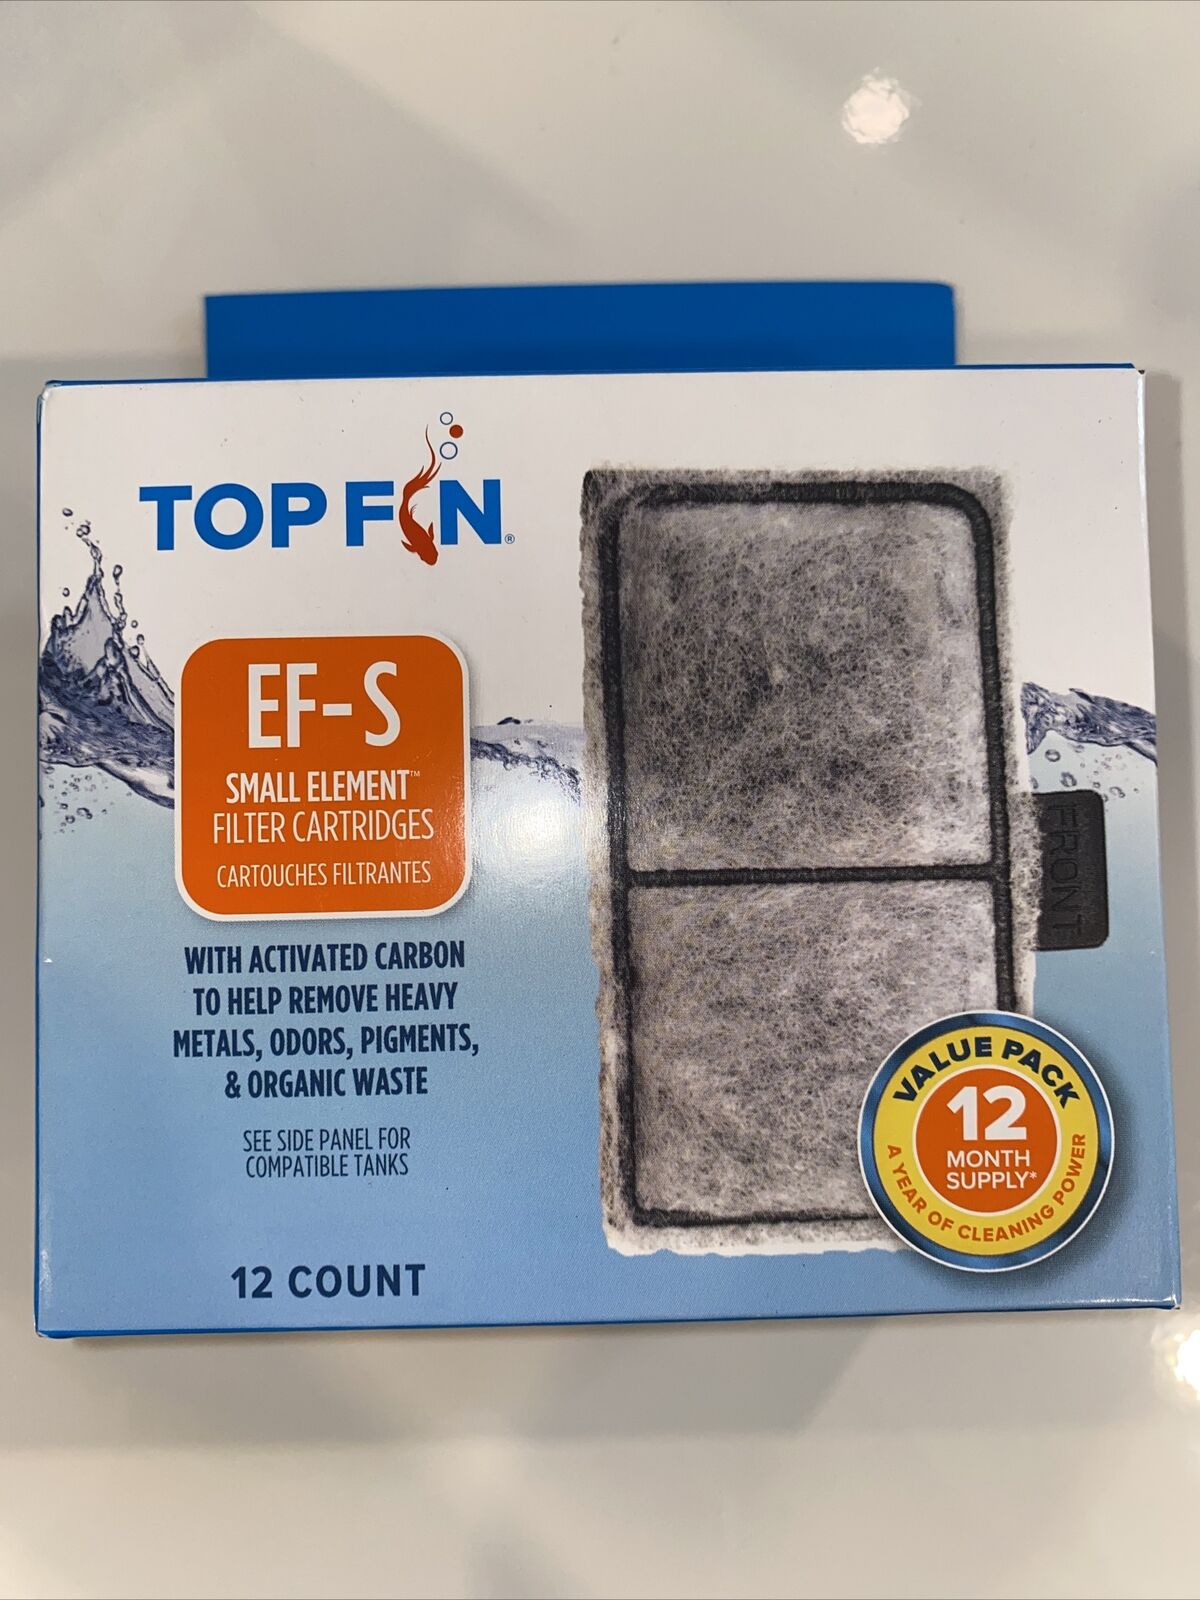 *NEW* TOP FIN EF-S Filter 12 PACK Size 2.1" x 3.7"  12 months Supply